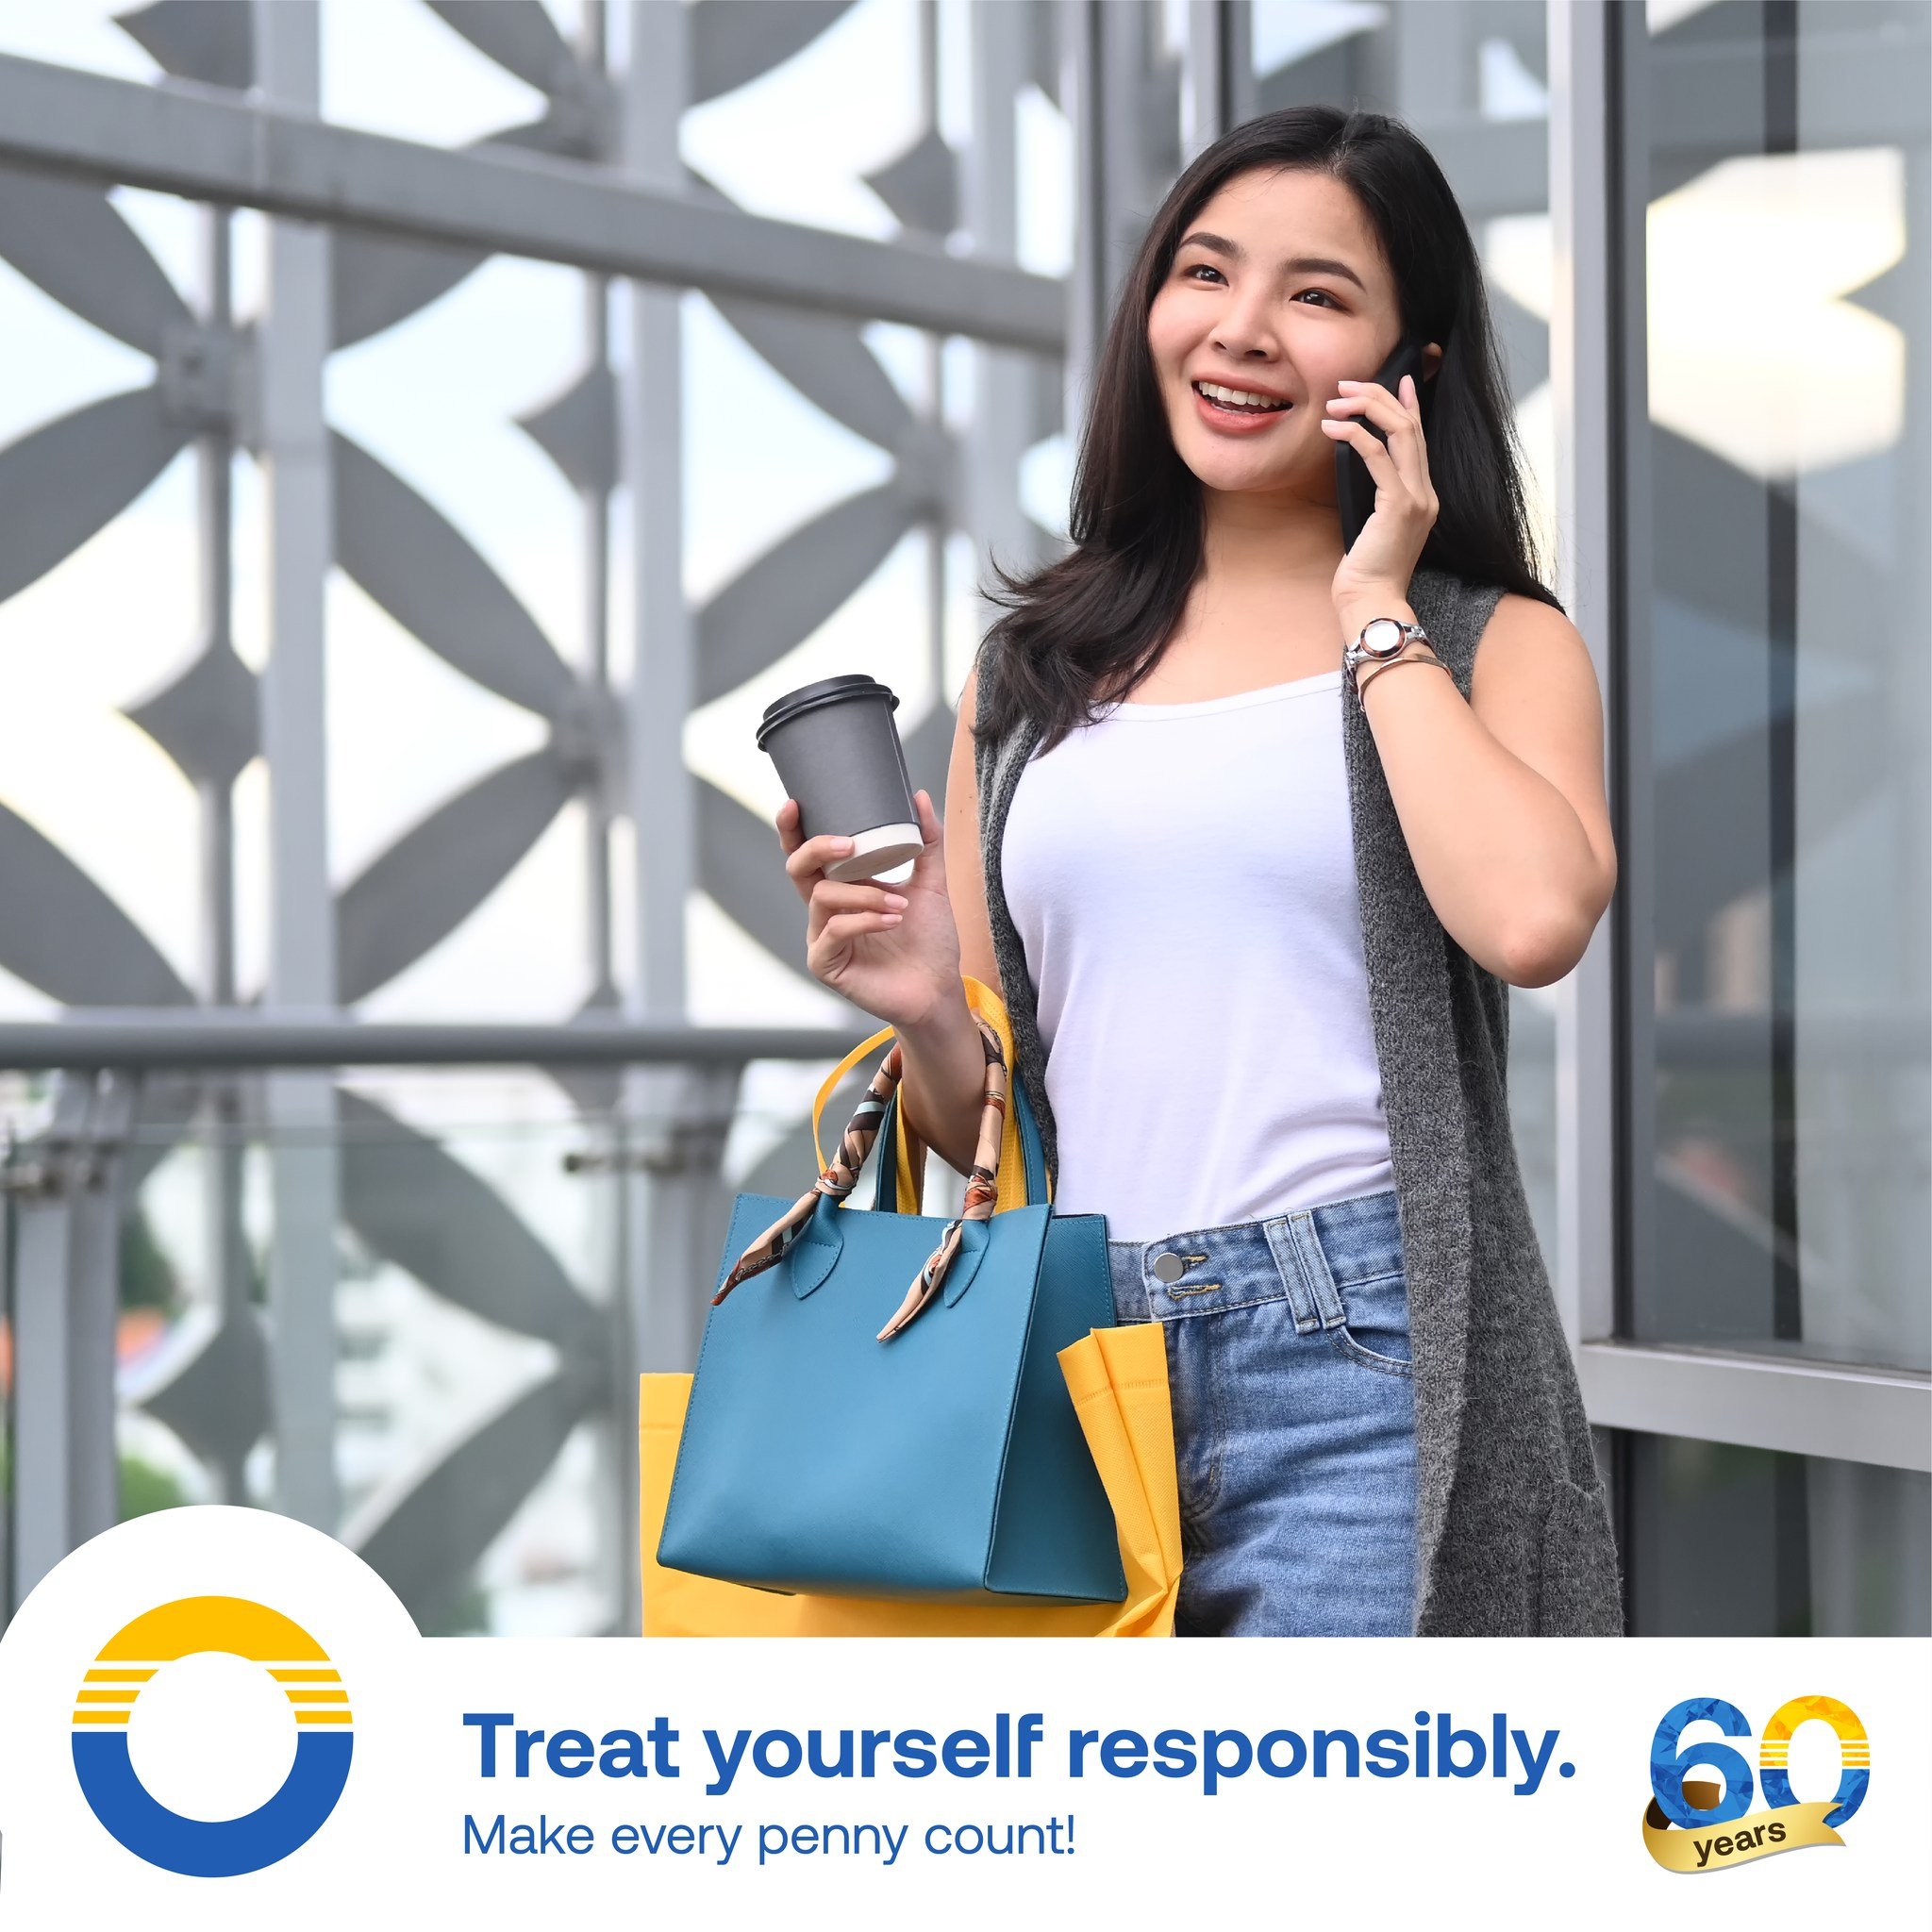 Retail therapy but make it thrifty. Save with BOF. Ask us how!

Visit our website to know more.
Passbook Accounts: https://www.bof.com.ph/passbook-accounts
ATM Debit Card: https://www.bof.com.ph/smartsavings

#BOF

BOF, Inc. (A Rural Bank) is regulat